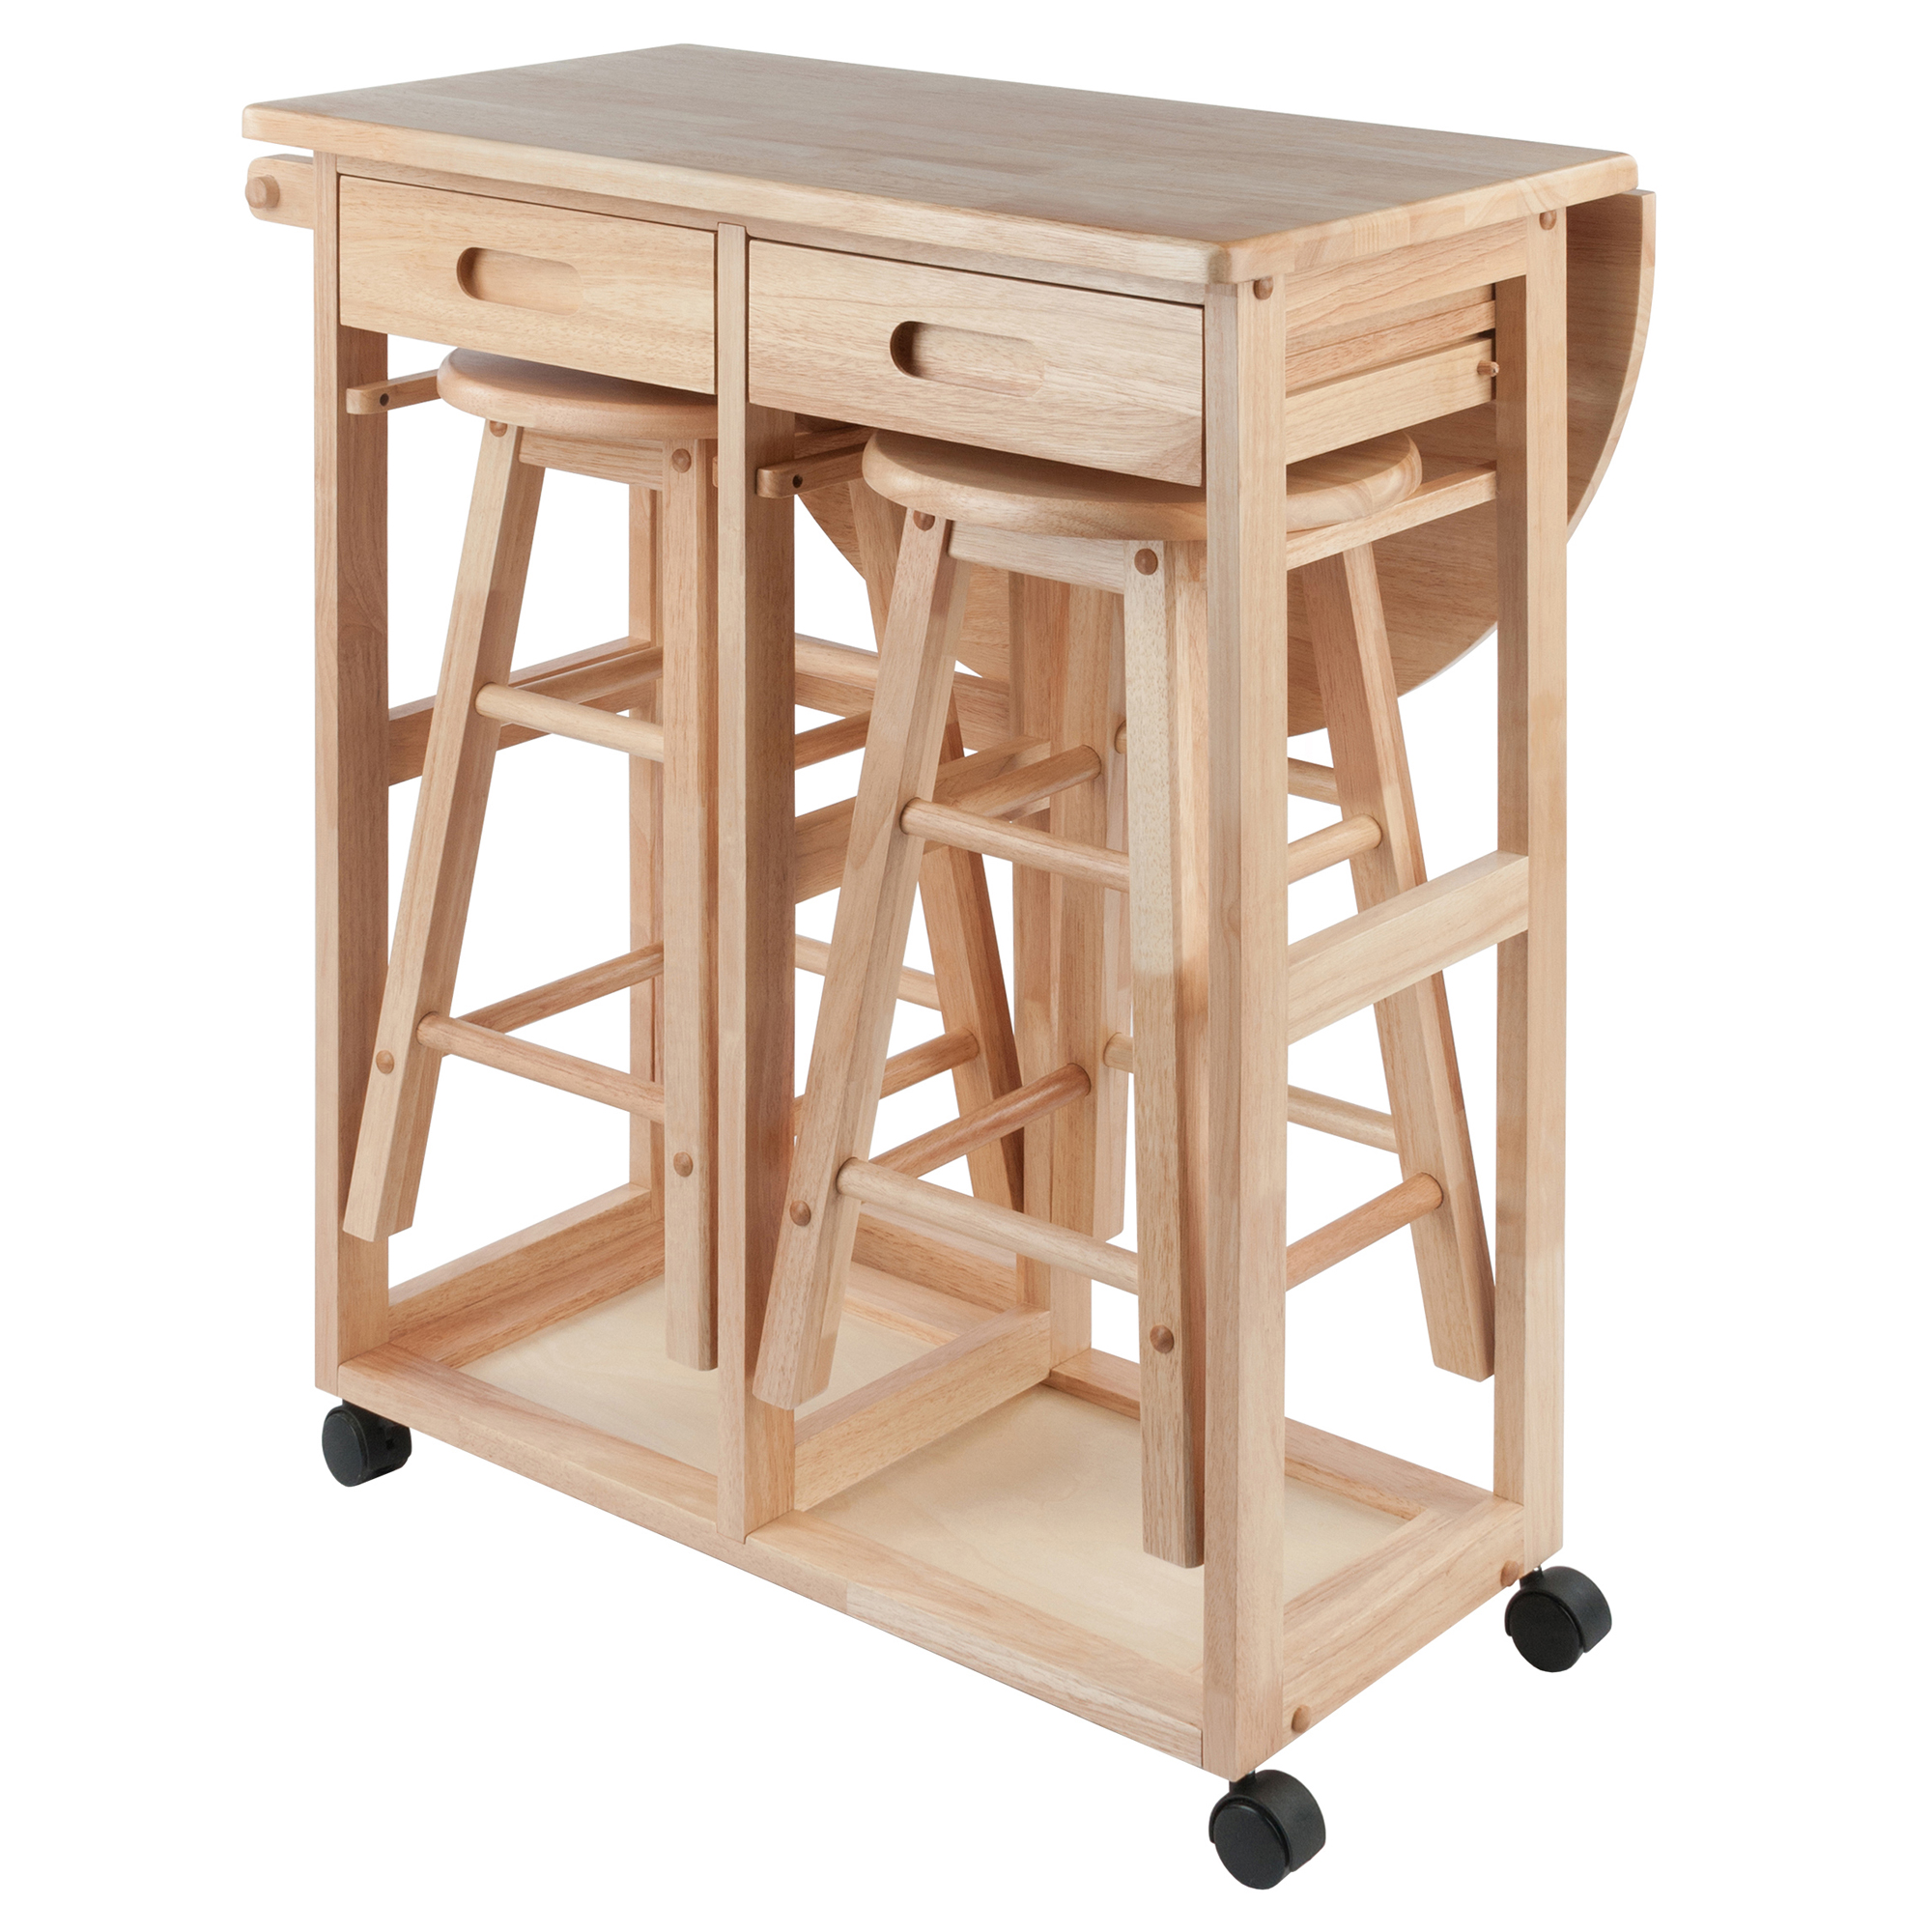 Winsome Wood Burnett 3-Pc Space Saver Set, 2 Tuck - away Stools, Natural Finish - image 2 of 14